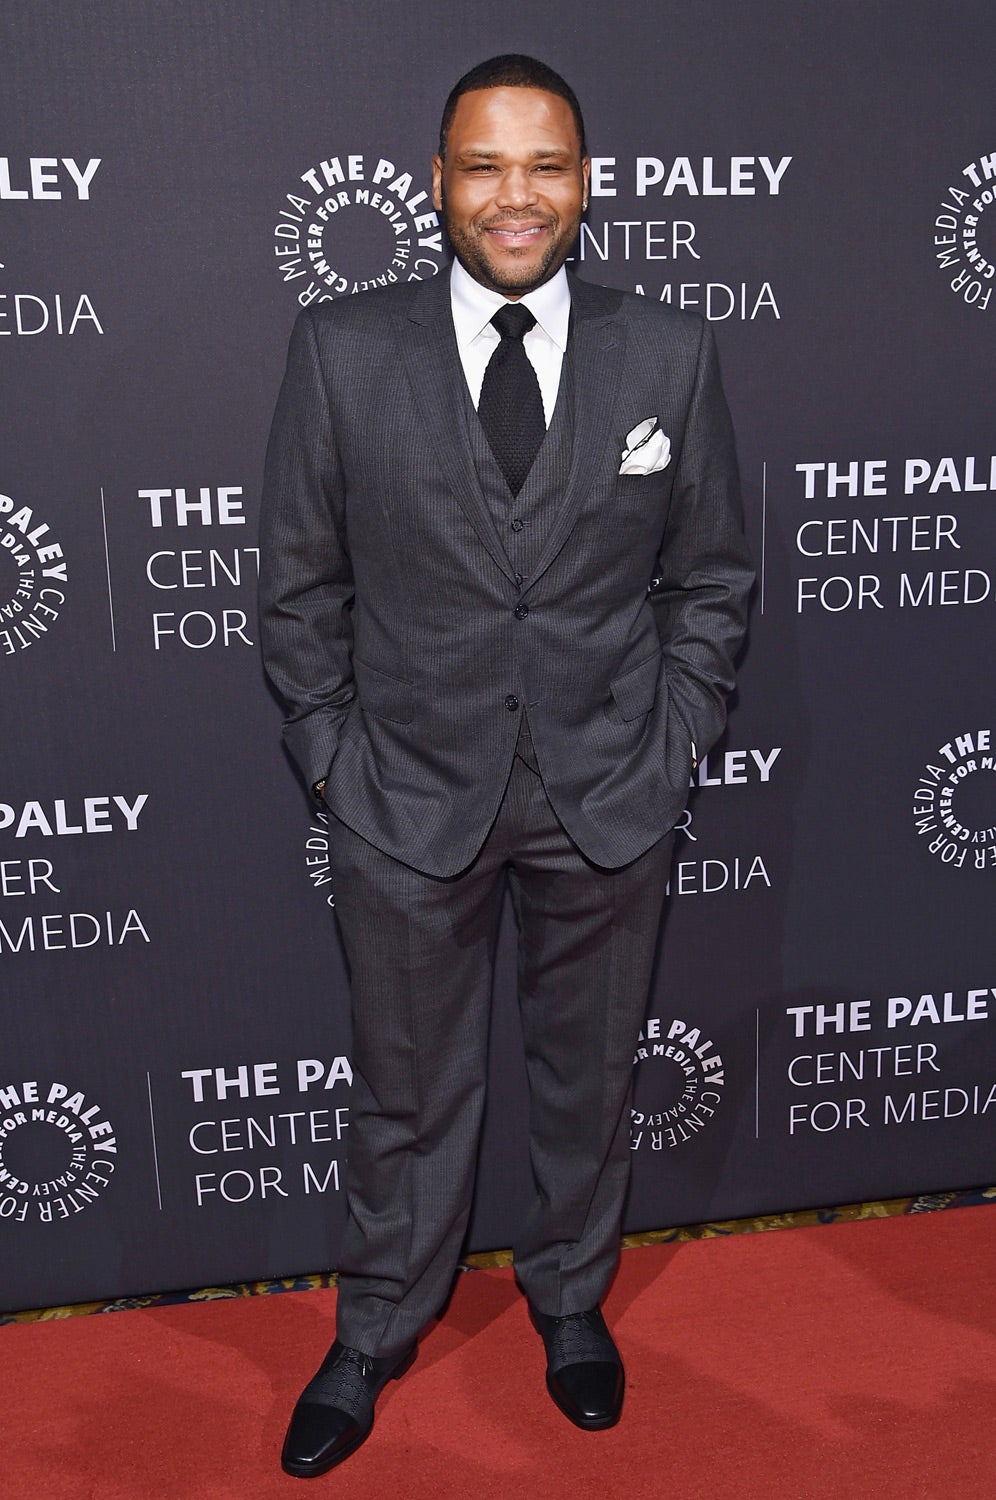 Paley Center Hosts Tribute to African-Americans on TV